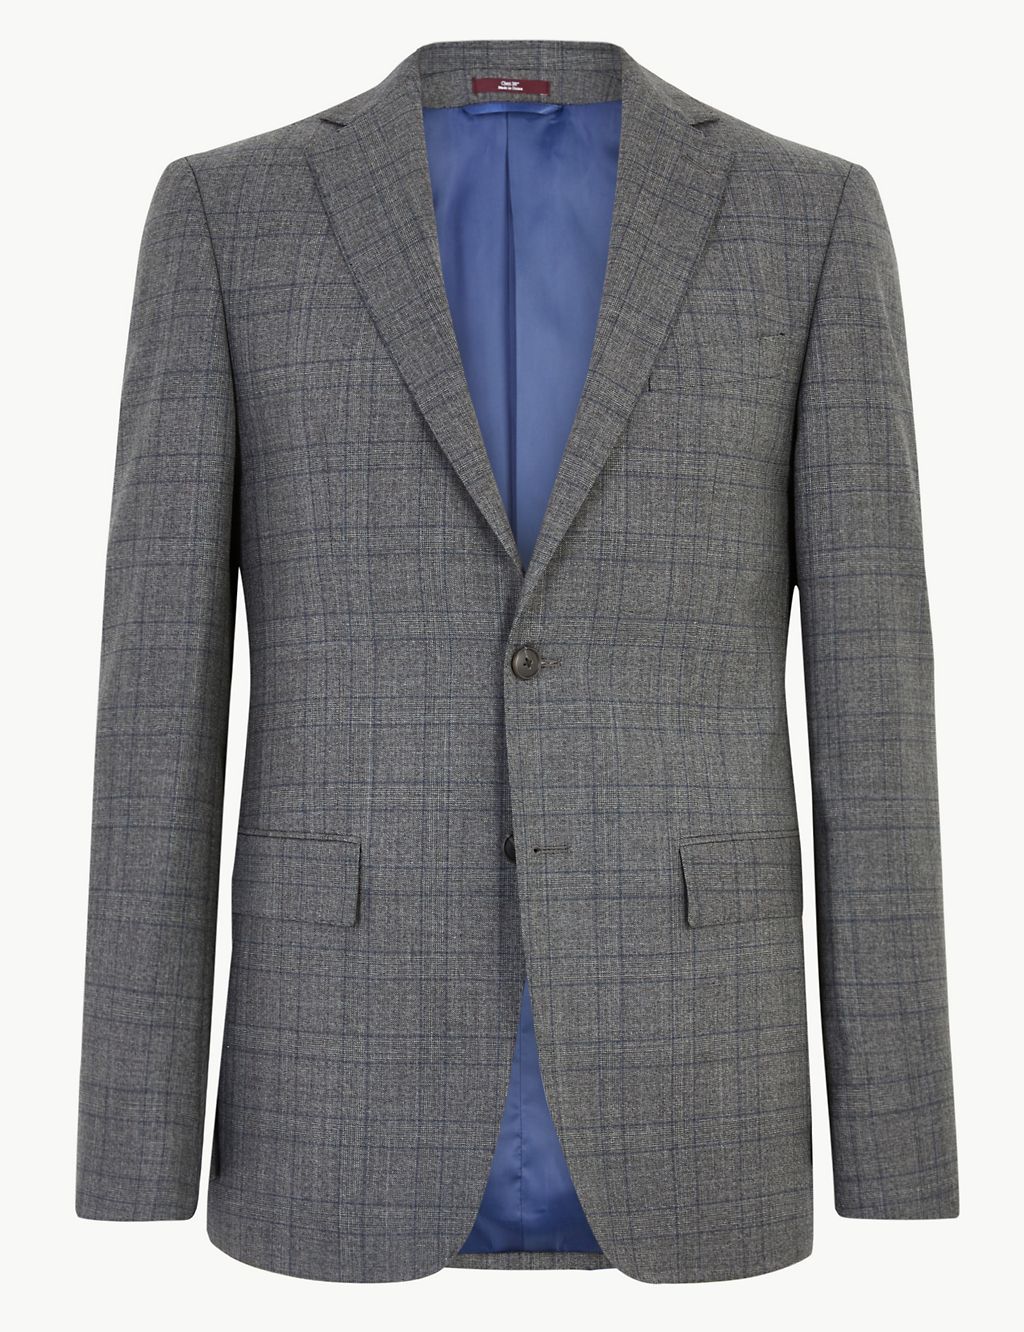 Charcoal Checked Pure Wool Jacket | M&S SARTORIAL | M&S